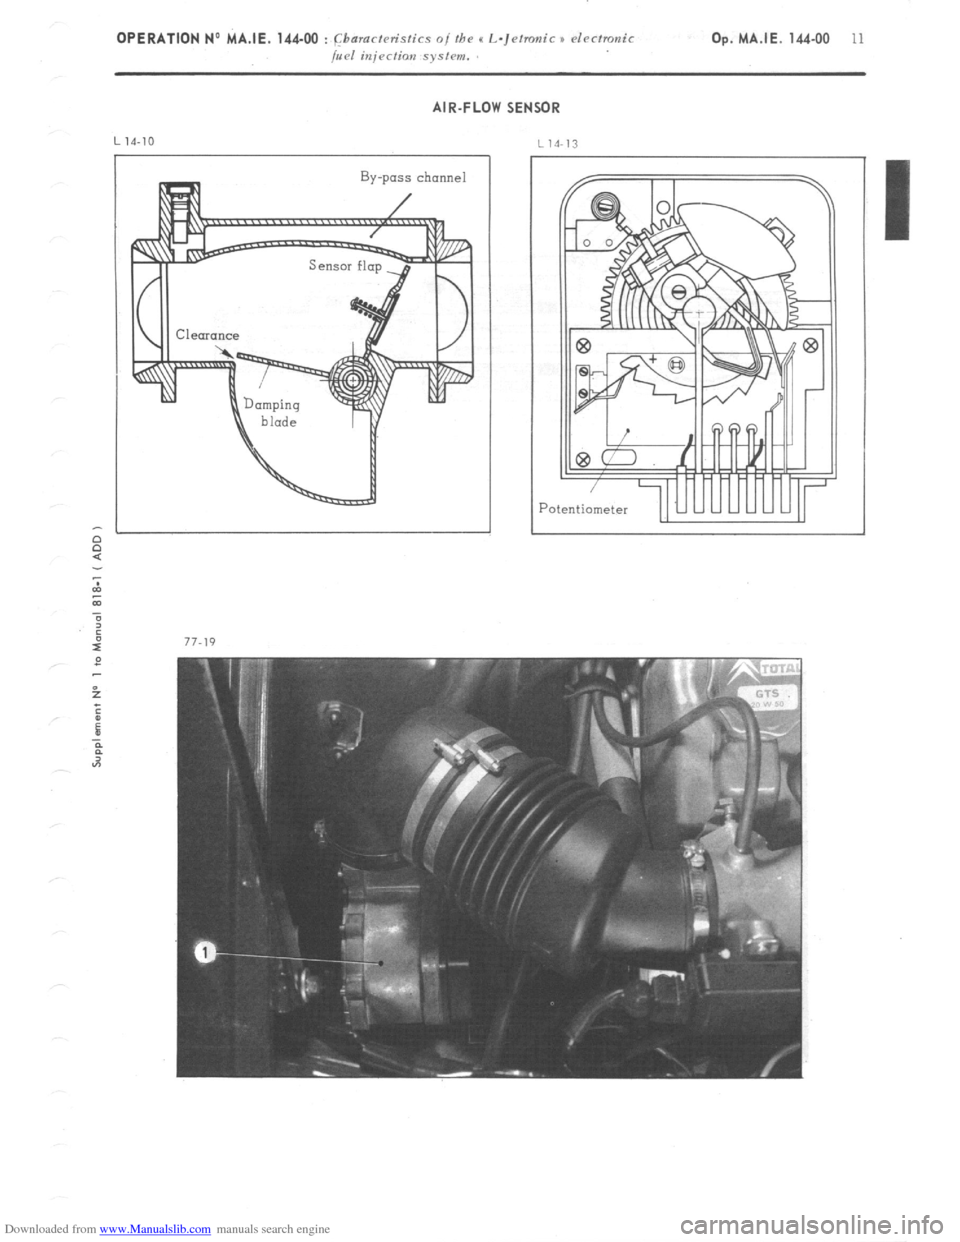 Citroen CX 1981 1.G Workshop Manual Downloaded from www.Manualslib.com manuals search engine OPERATION No MA.IE. 14400 : @ nracteristics of the I( L-~elronic x cl~~tronic 
fuel injrction sysfem. Op. MA.IE. 14400 11 
AIR-FLOW SENSOR 
‘